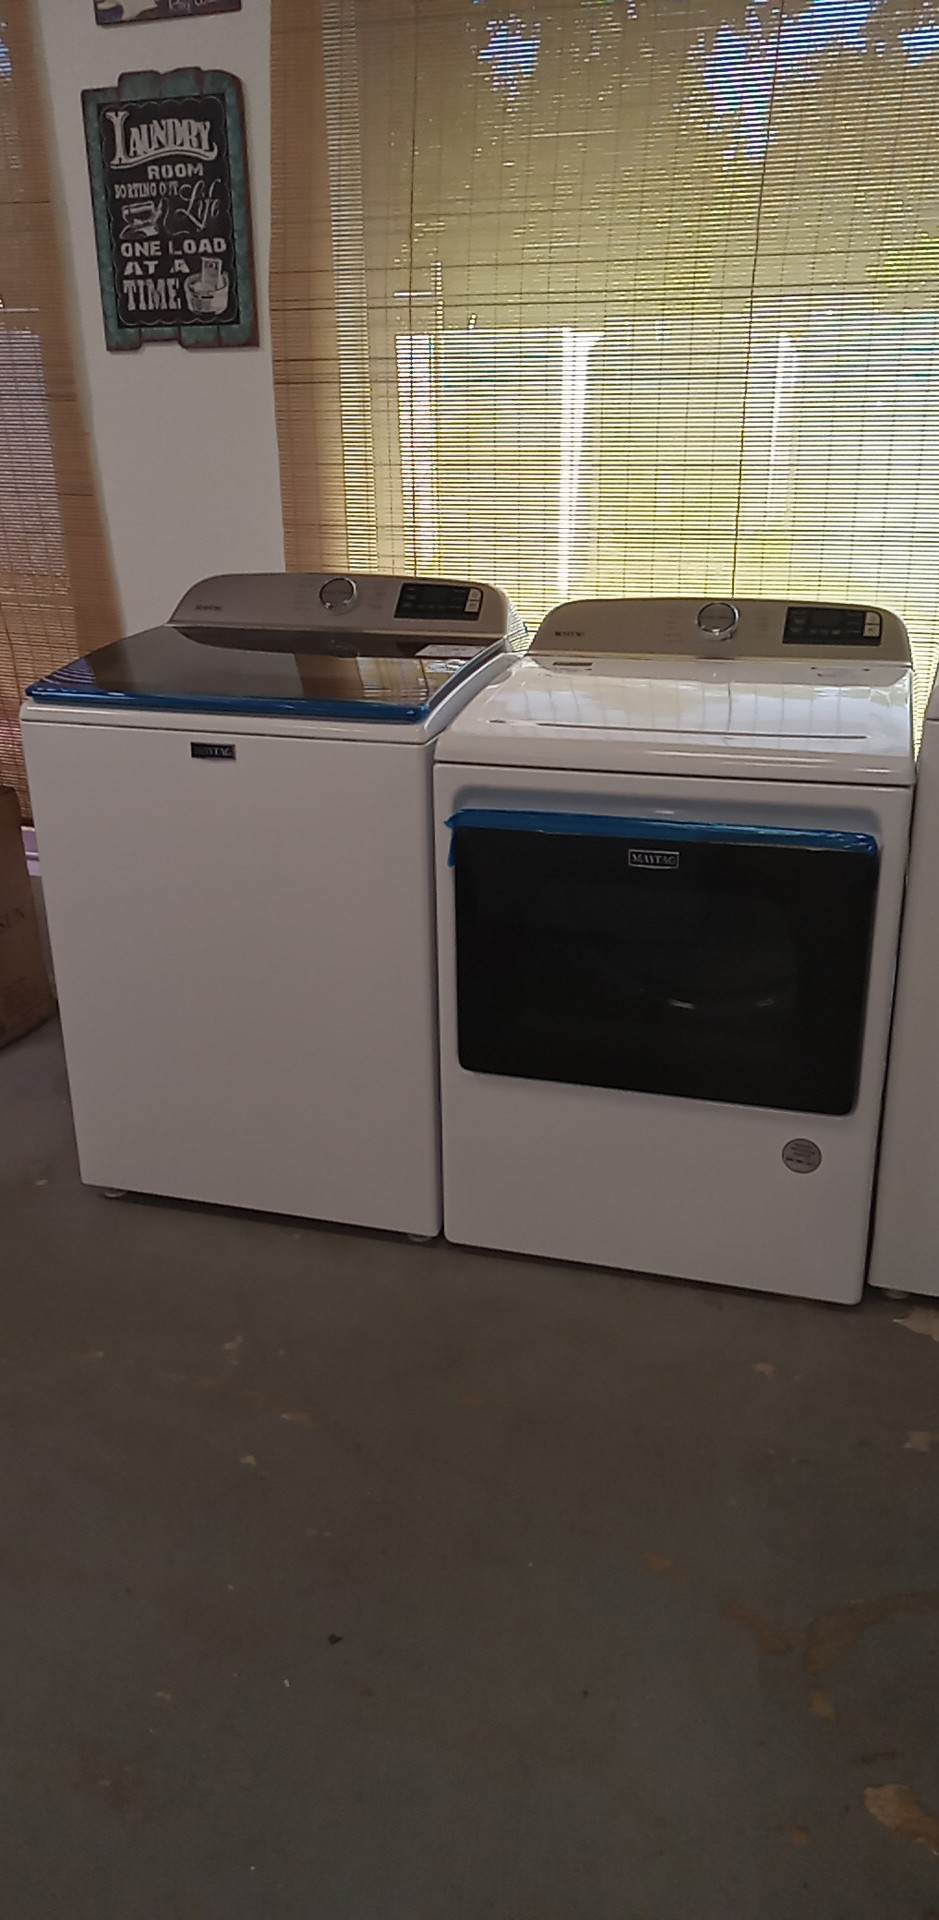 New Maytag 5.3 Washer and 7.4  dryer set